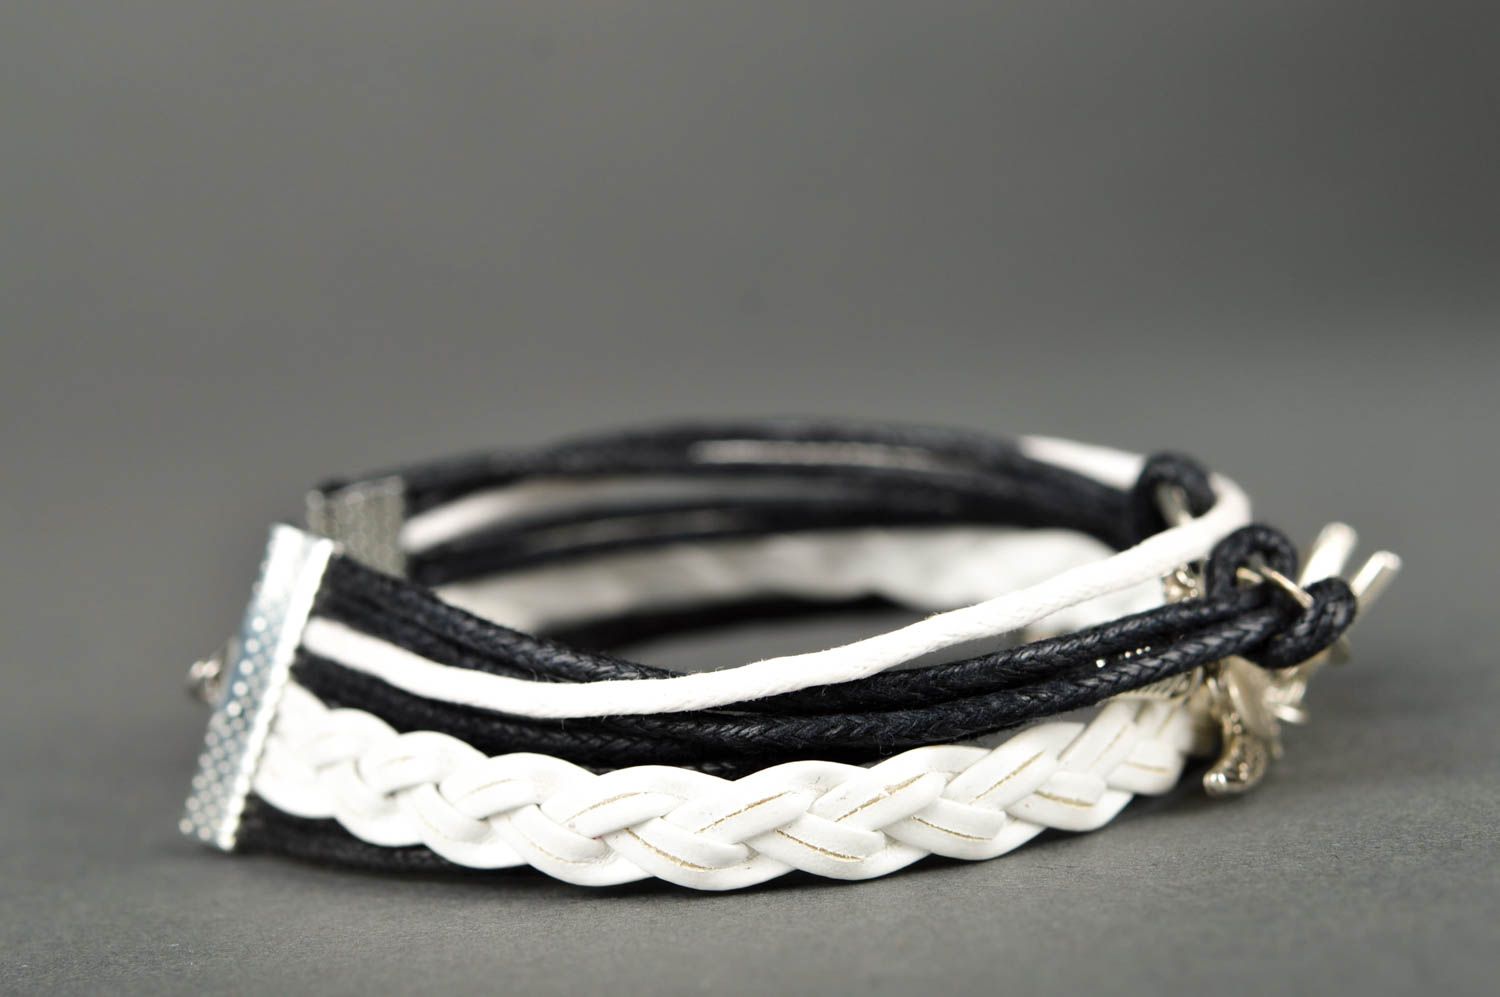 Handmade cord bracelet string bracelet fashion accessories for girls cool gifts photo 3